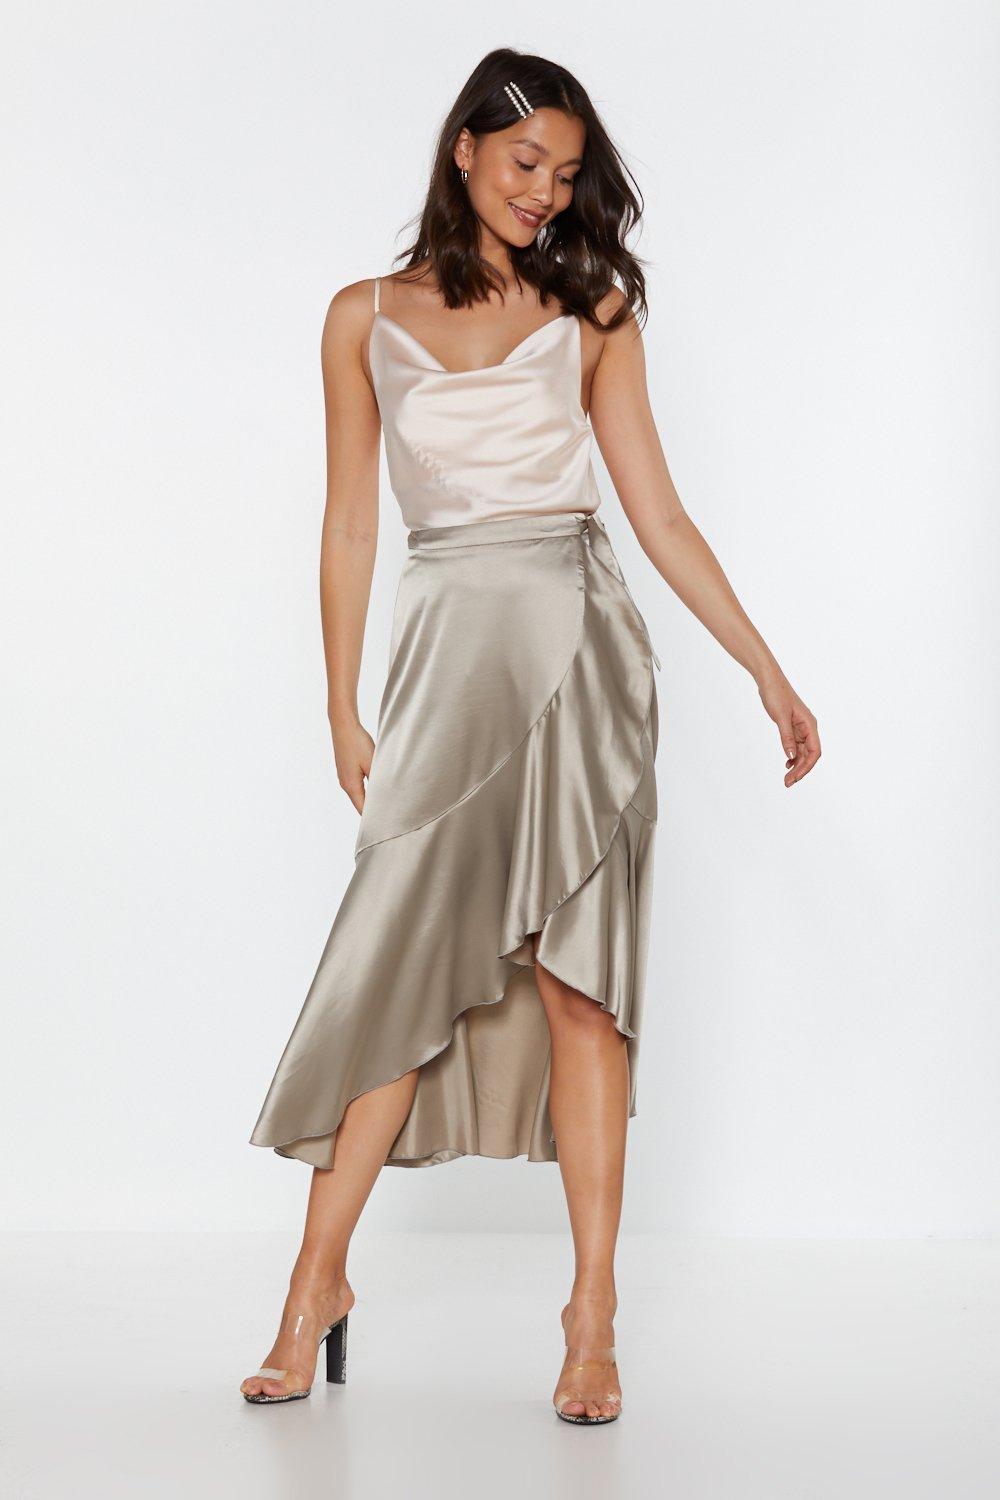 satin wrap skirt outfit㸀 Latest trends ...